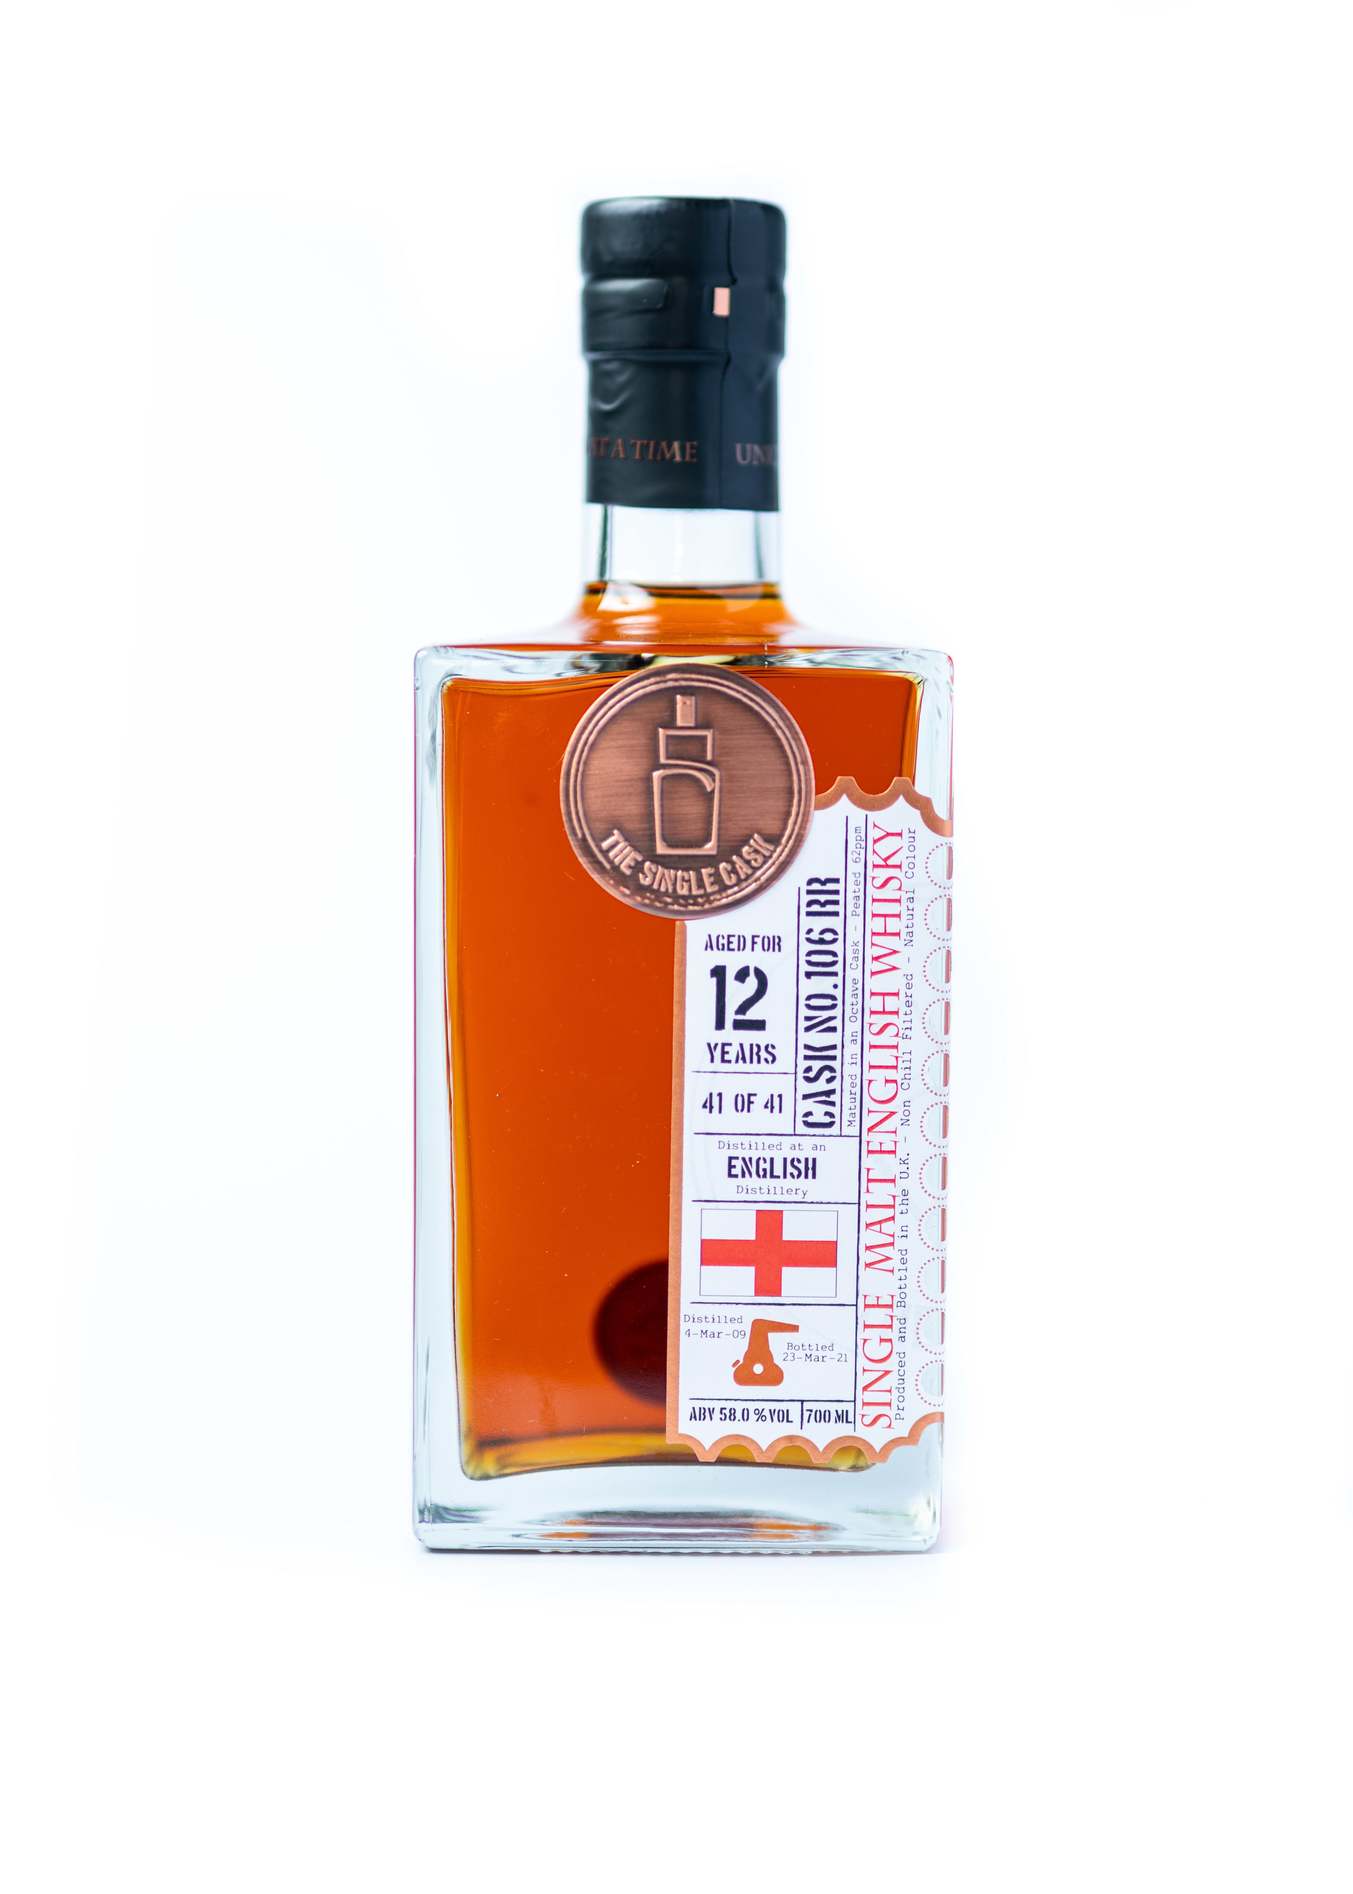 English Whisky smoky by the single cask